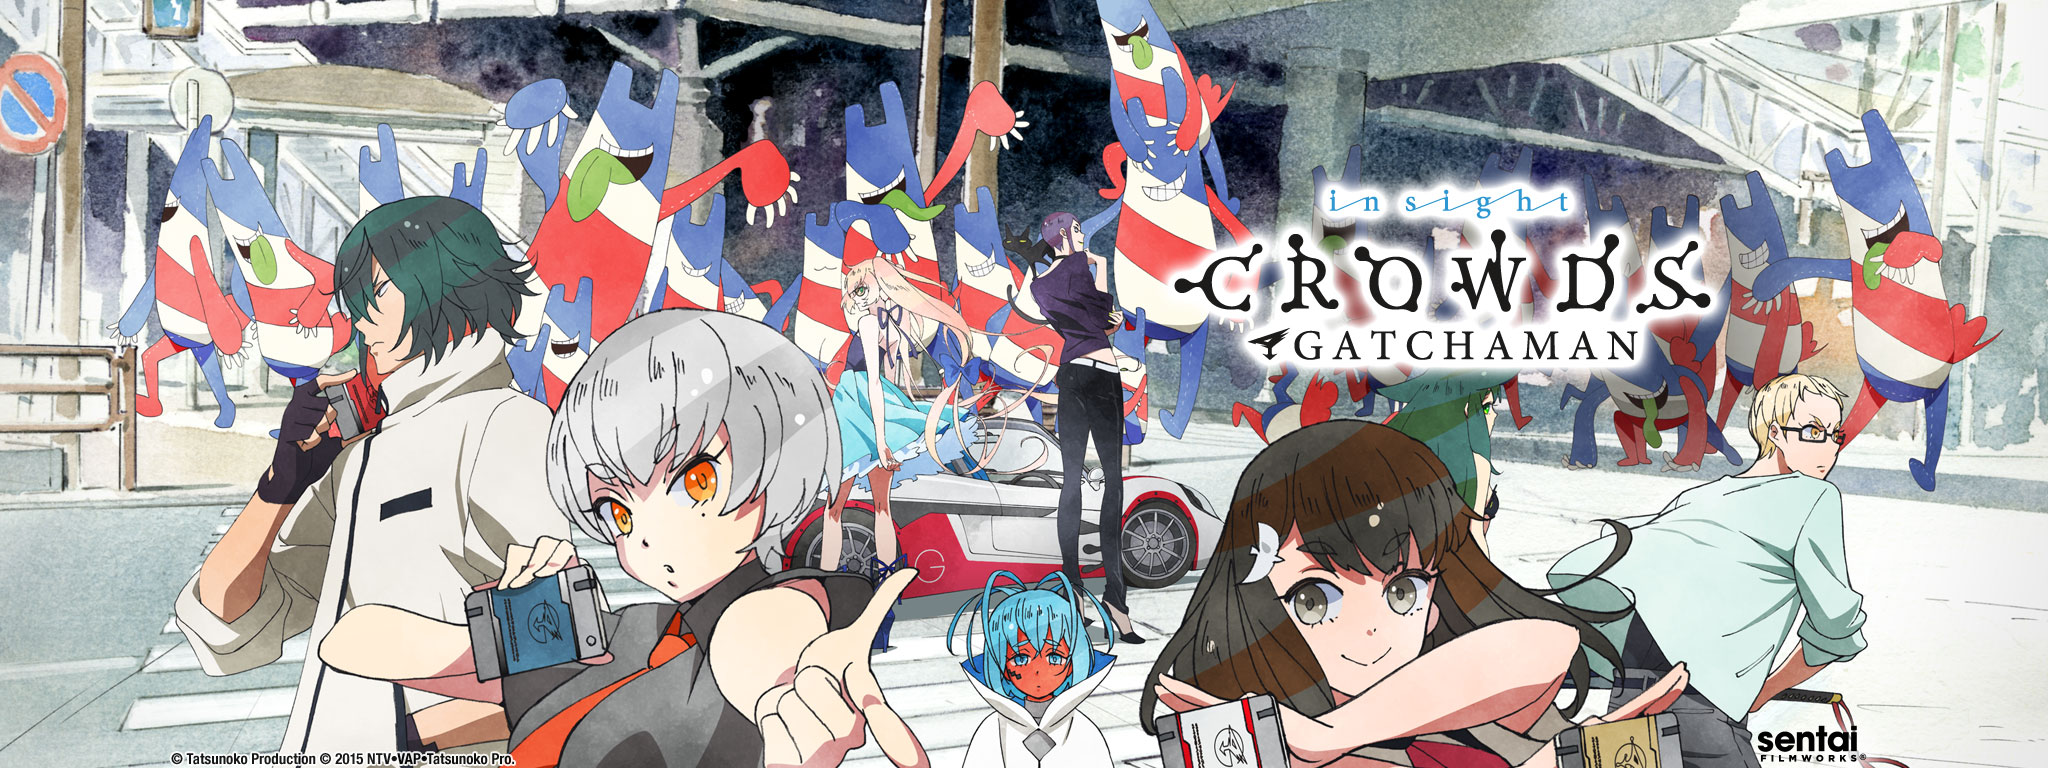 Title Art for Gatchaman Crowds insight